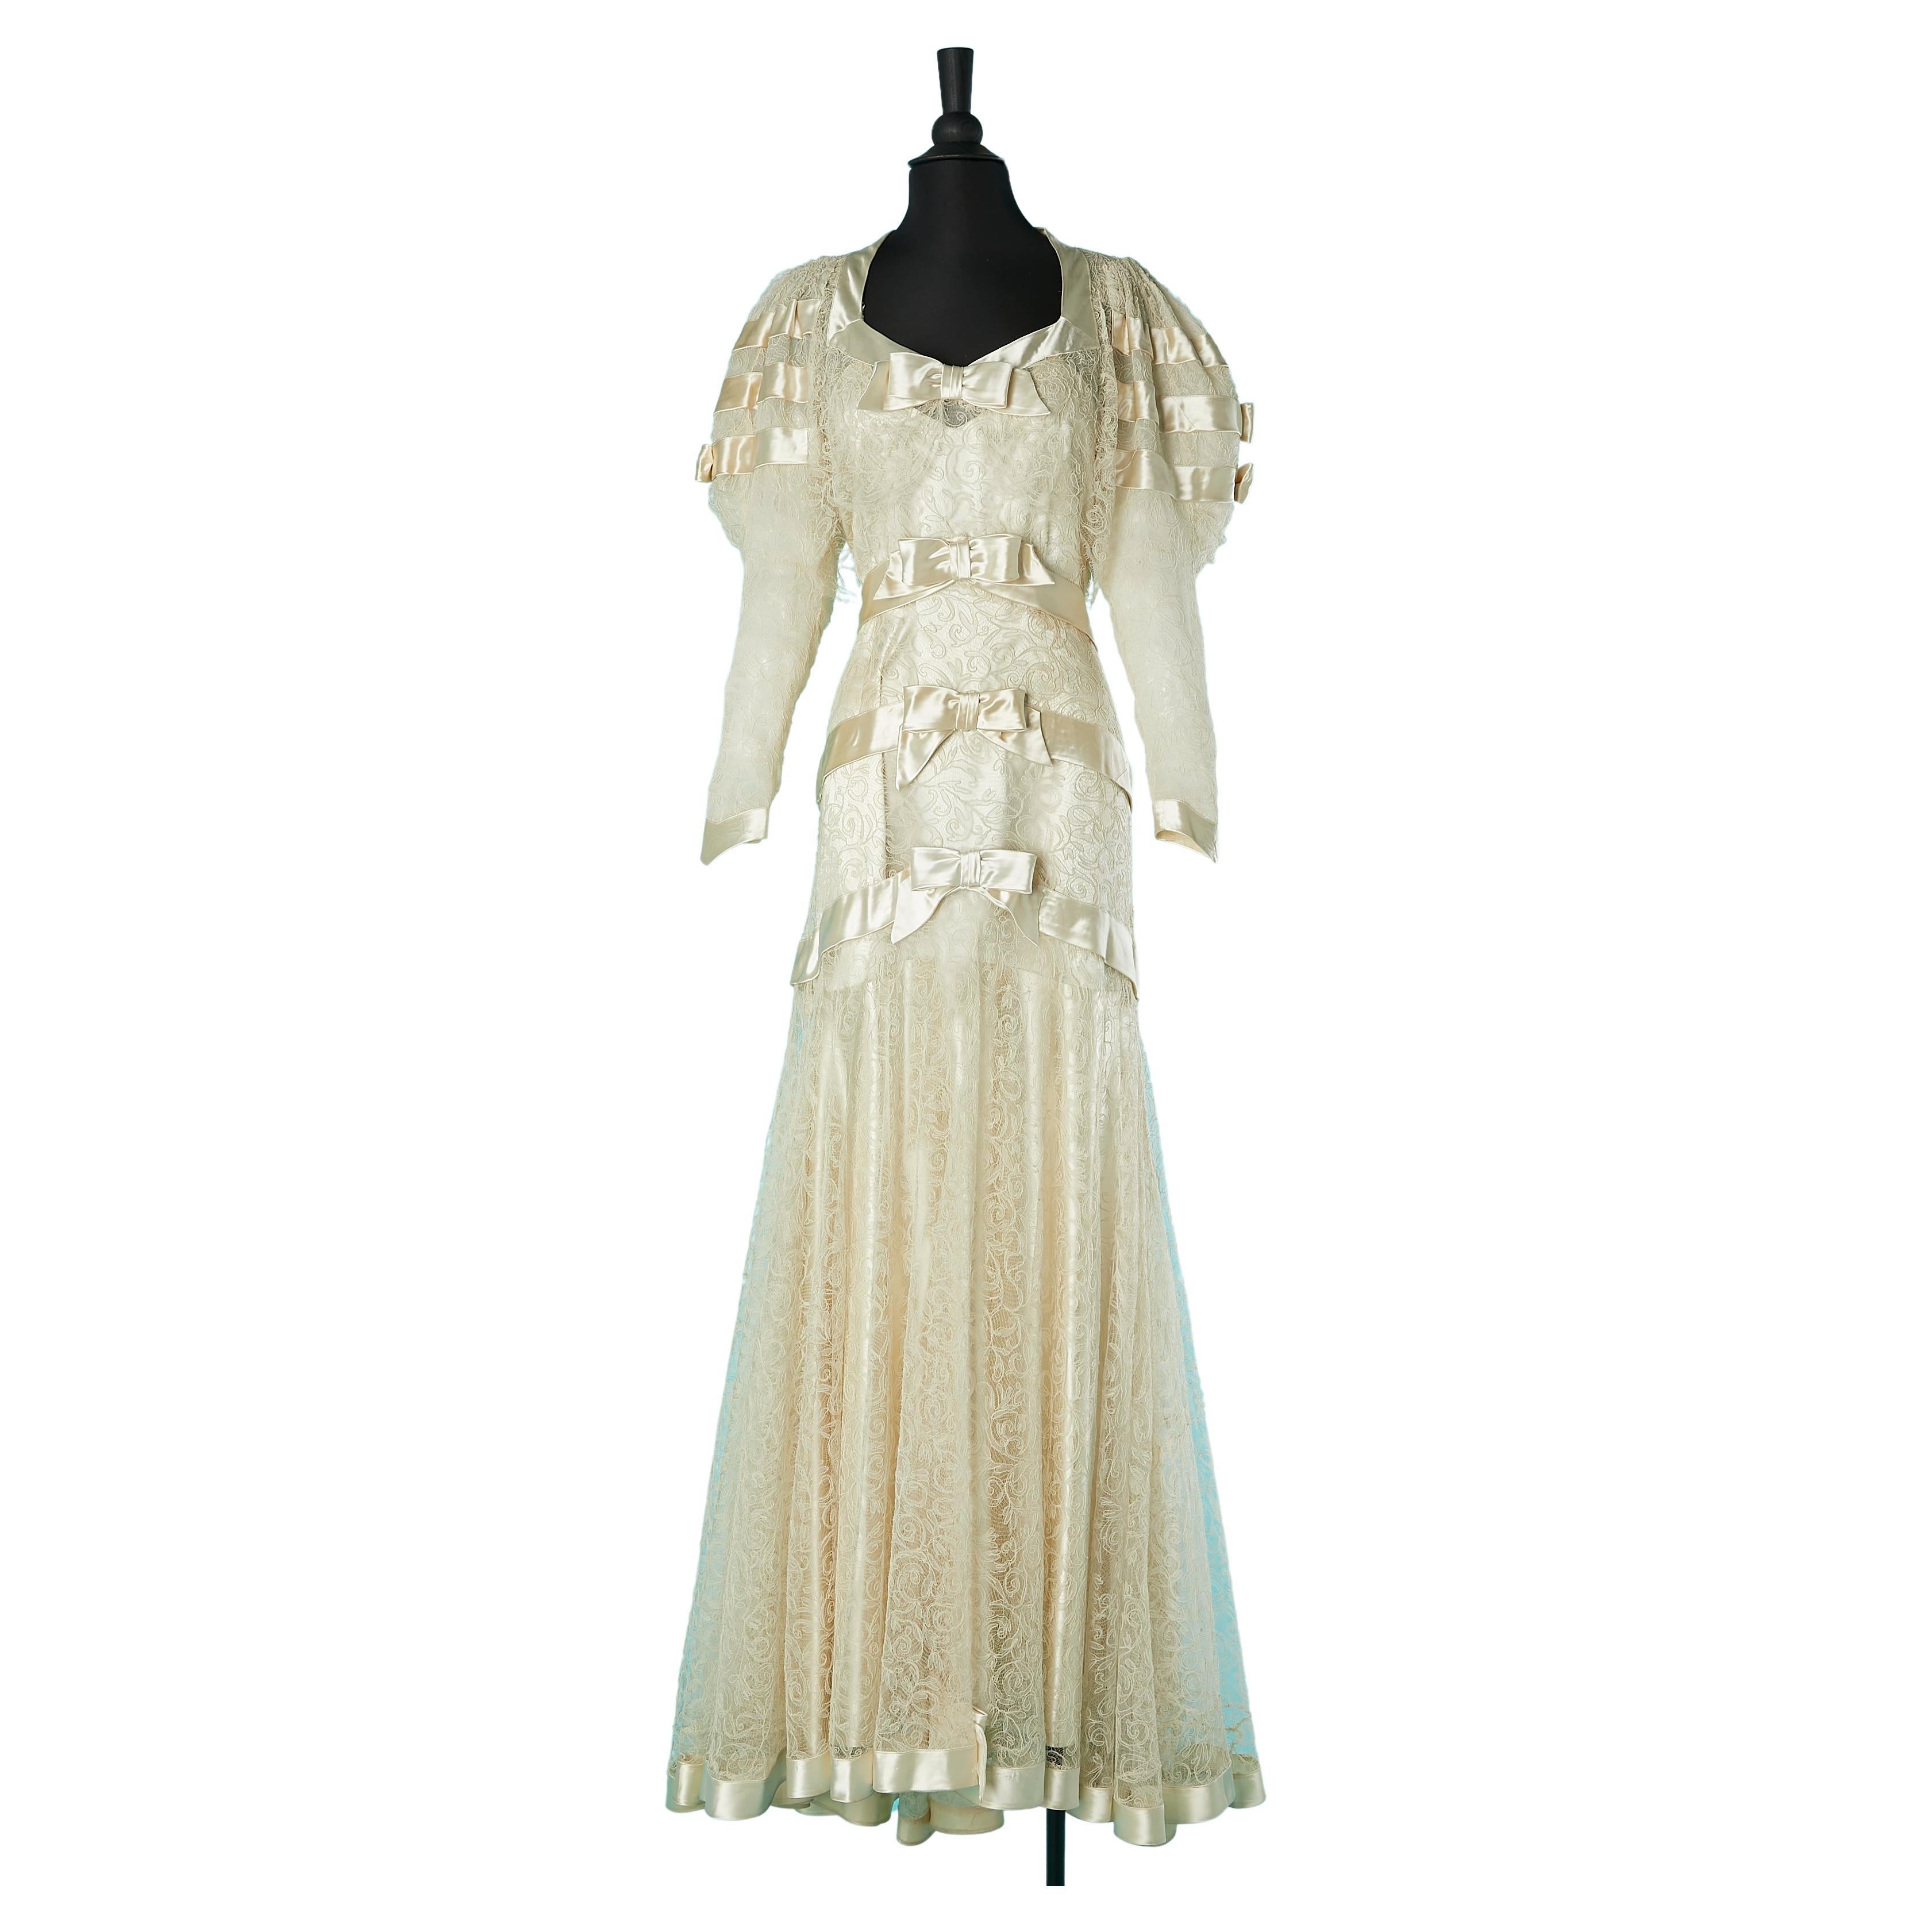  Off-white lace and satin bow wedding dress Circa 1930's  For Sale